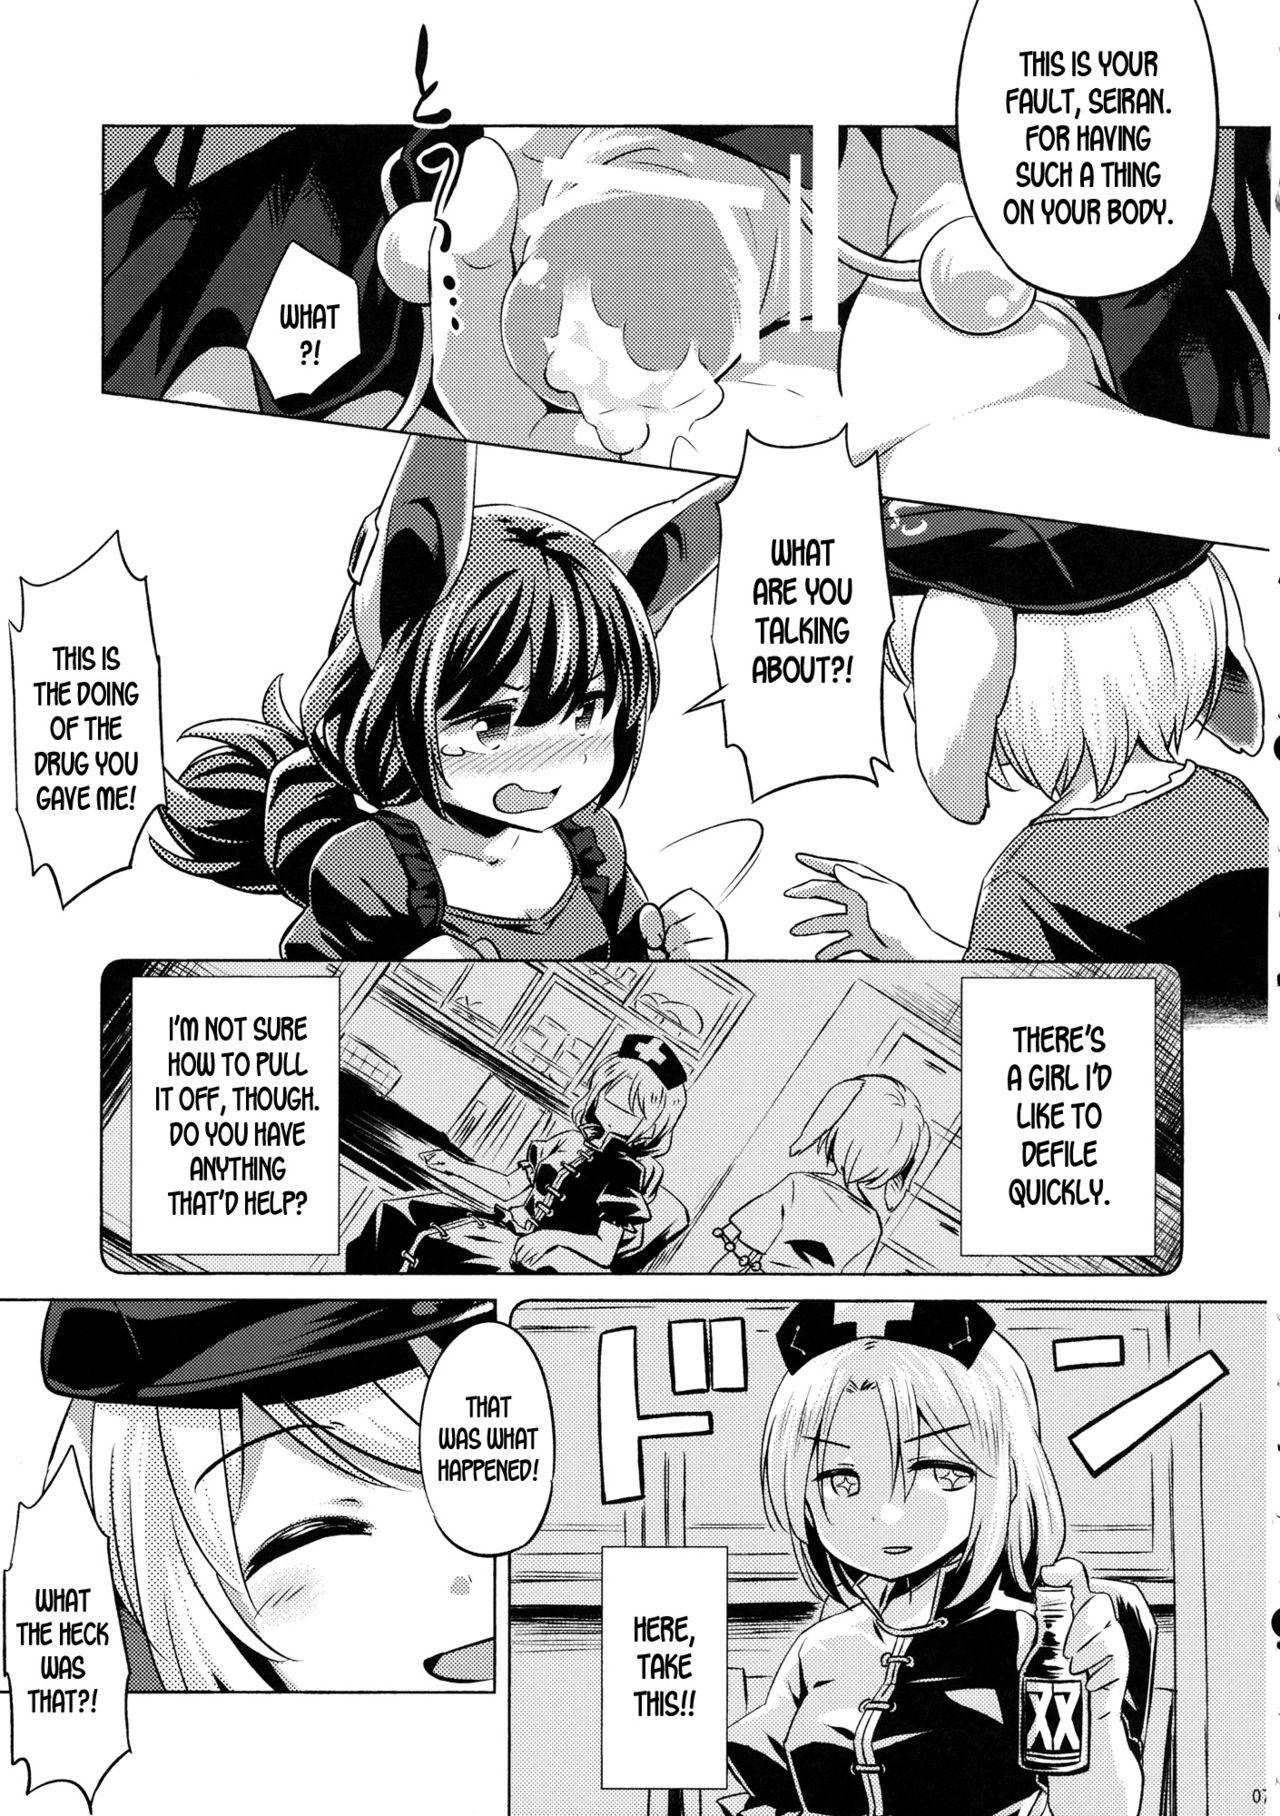 Fat Pussy Speed Strike Seiran - Touhou project Sextape - Page 6